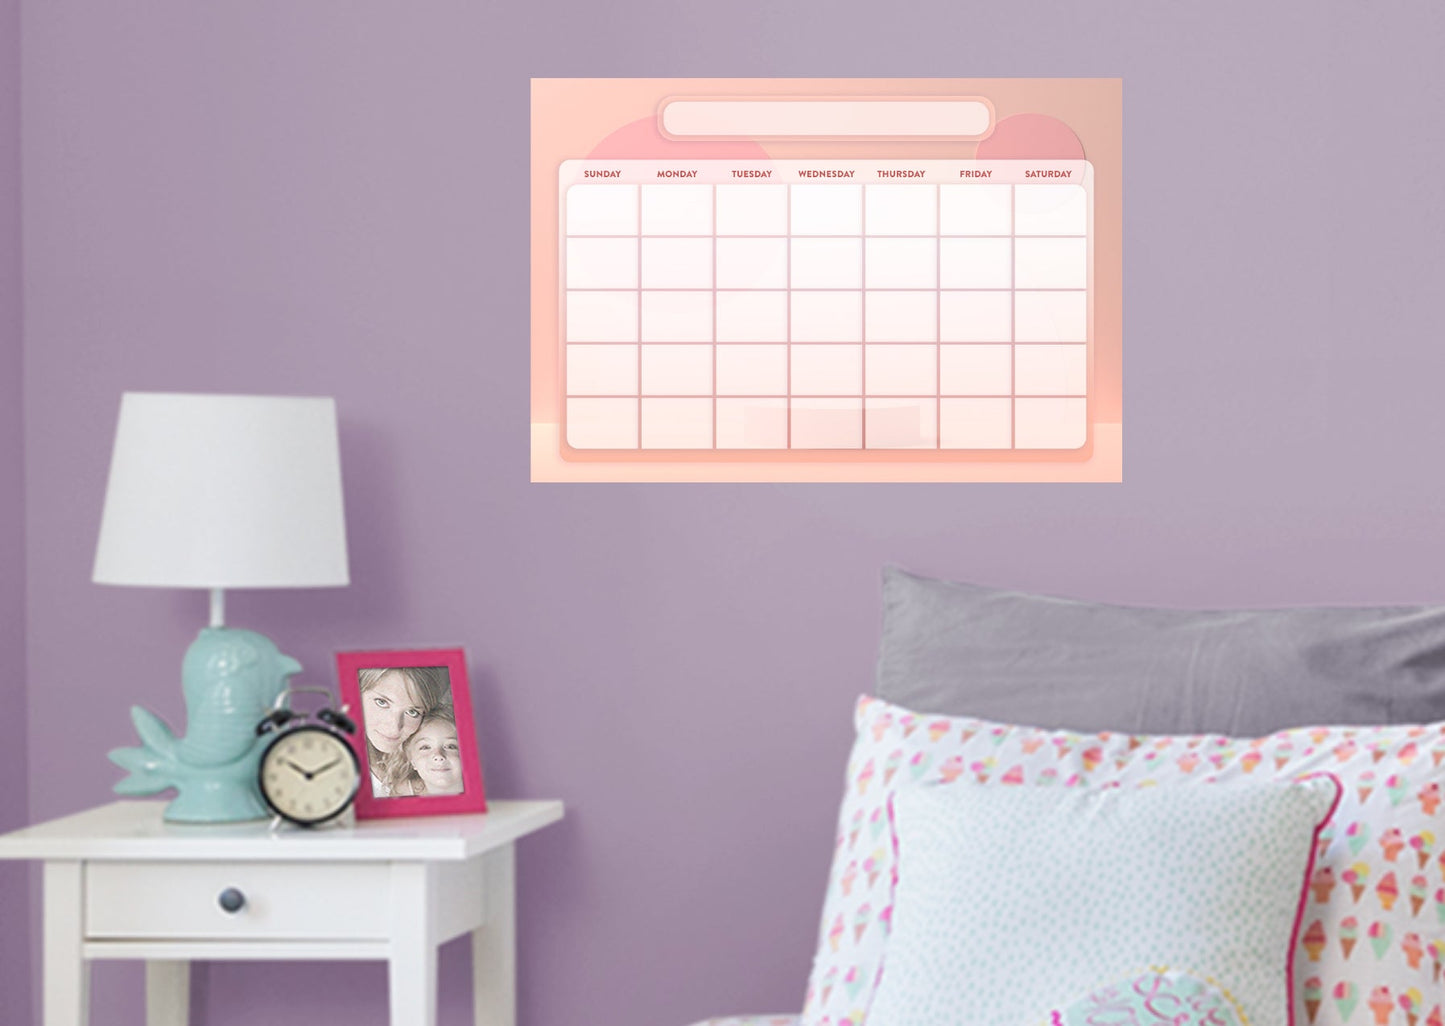 Calendars: Pink One Month Calendar Dry Erase - Removable Adhesive Decal